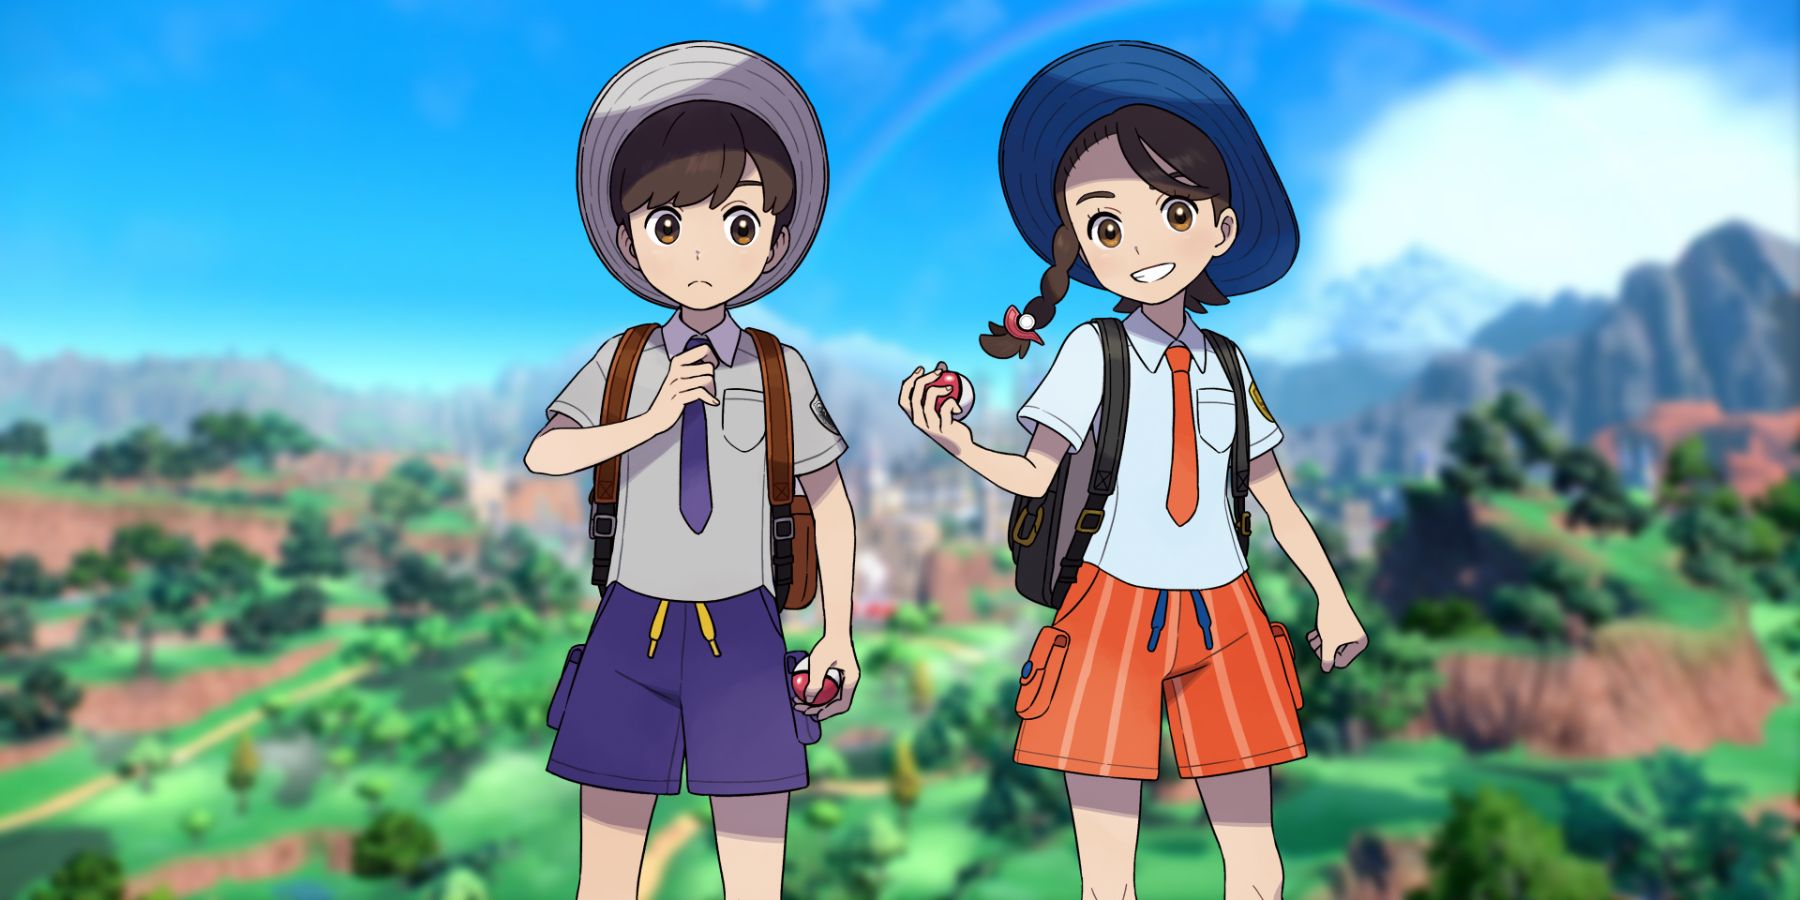 Official artwork of Pokémon Scarlet and Violet's default main characters, Florian and Juliana, superimposed over a blurred vista showing the games' open world Paldea region.